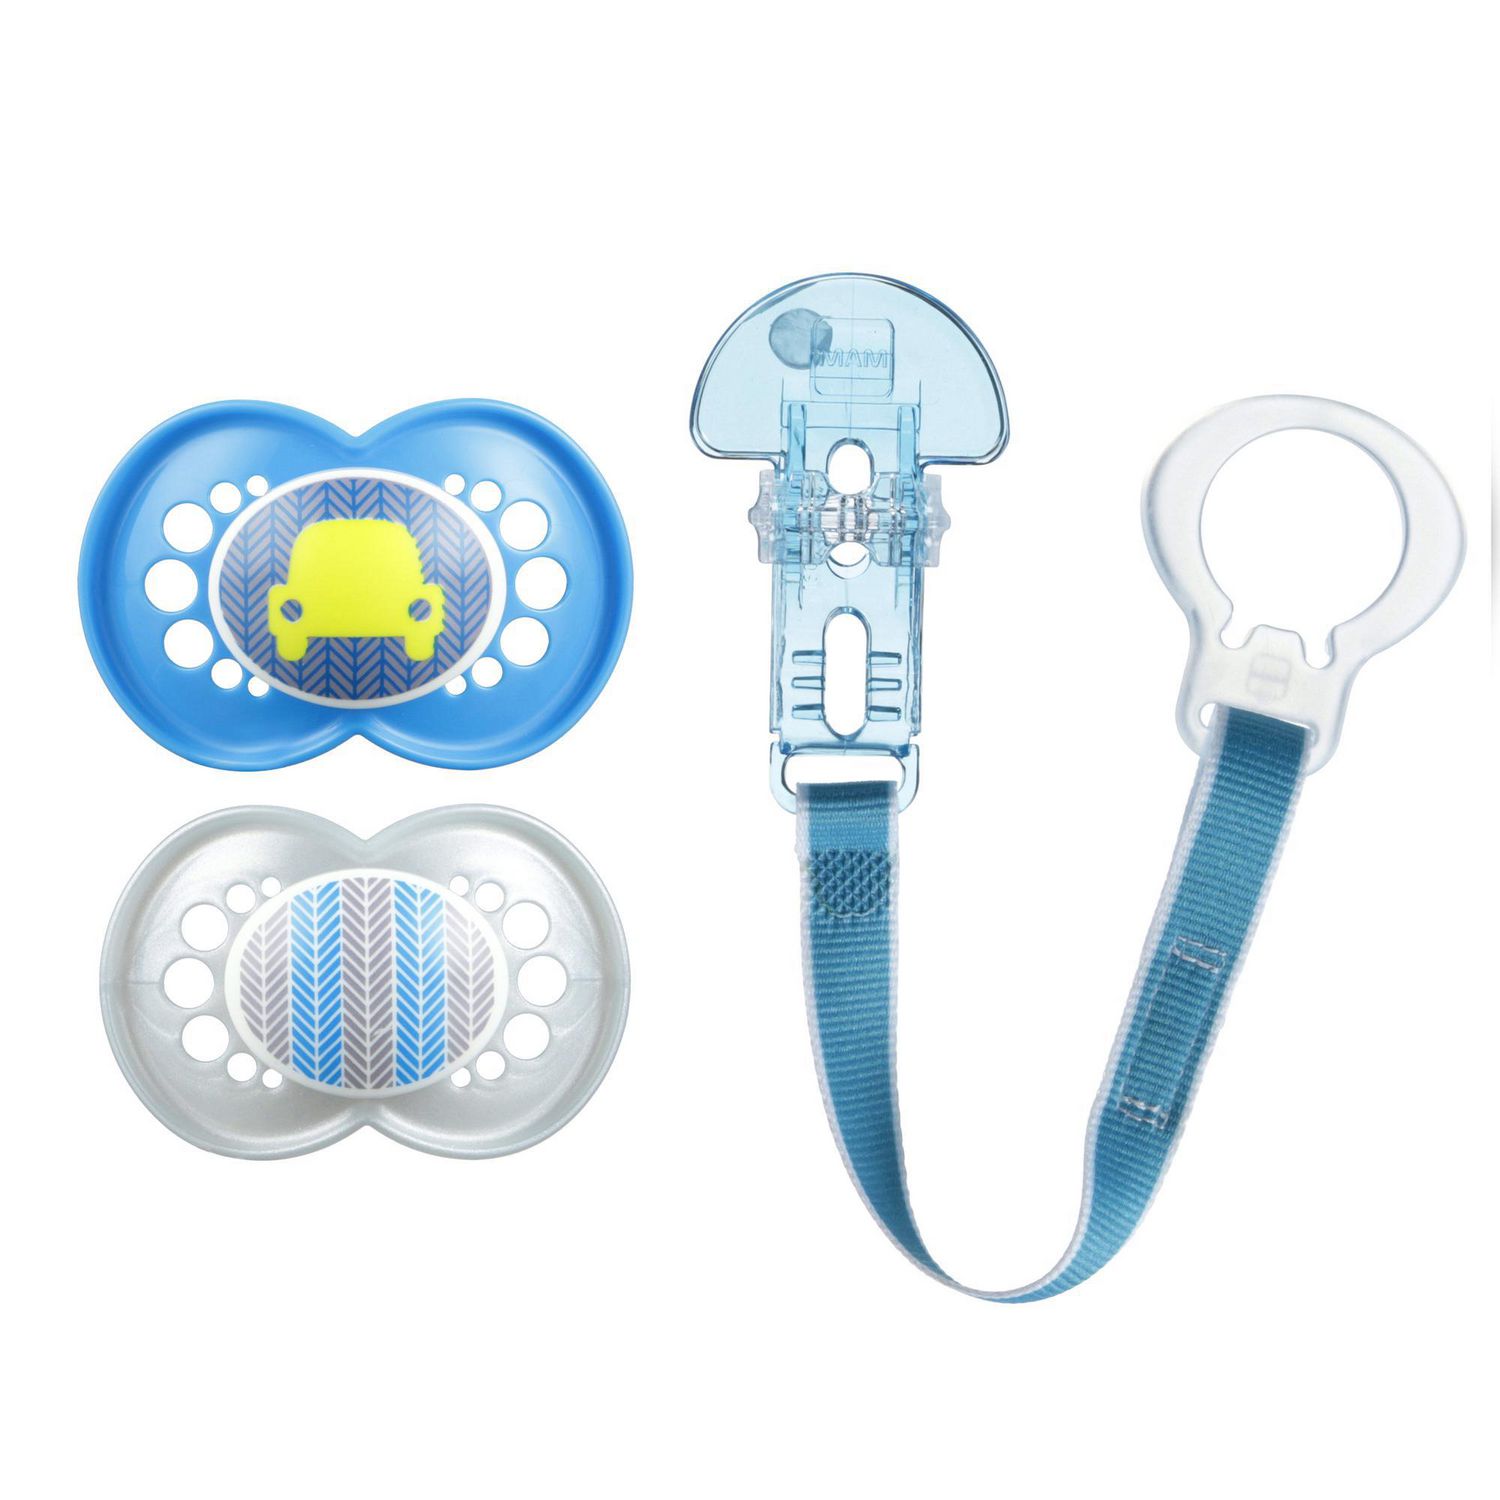 2 Pacifiers & 1 Clip Baby Pacifiers “I Love Daddy” Design Baby Pacifier Clips MAM Pacifier and MAM Pacifier Clip Value Pack Designs May Vary Pacifiers 0-6 Months for Baby Boy 